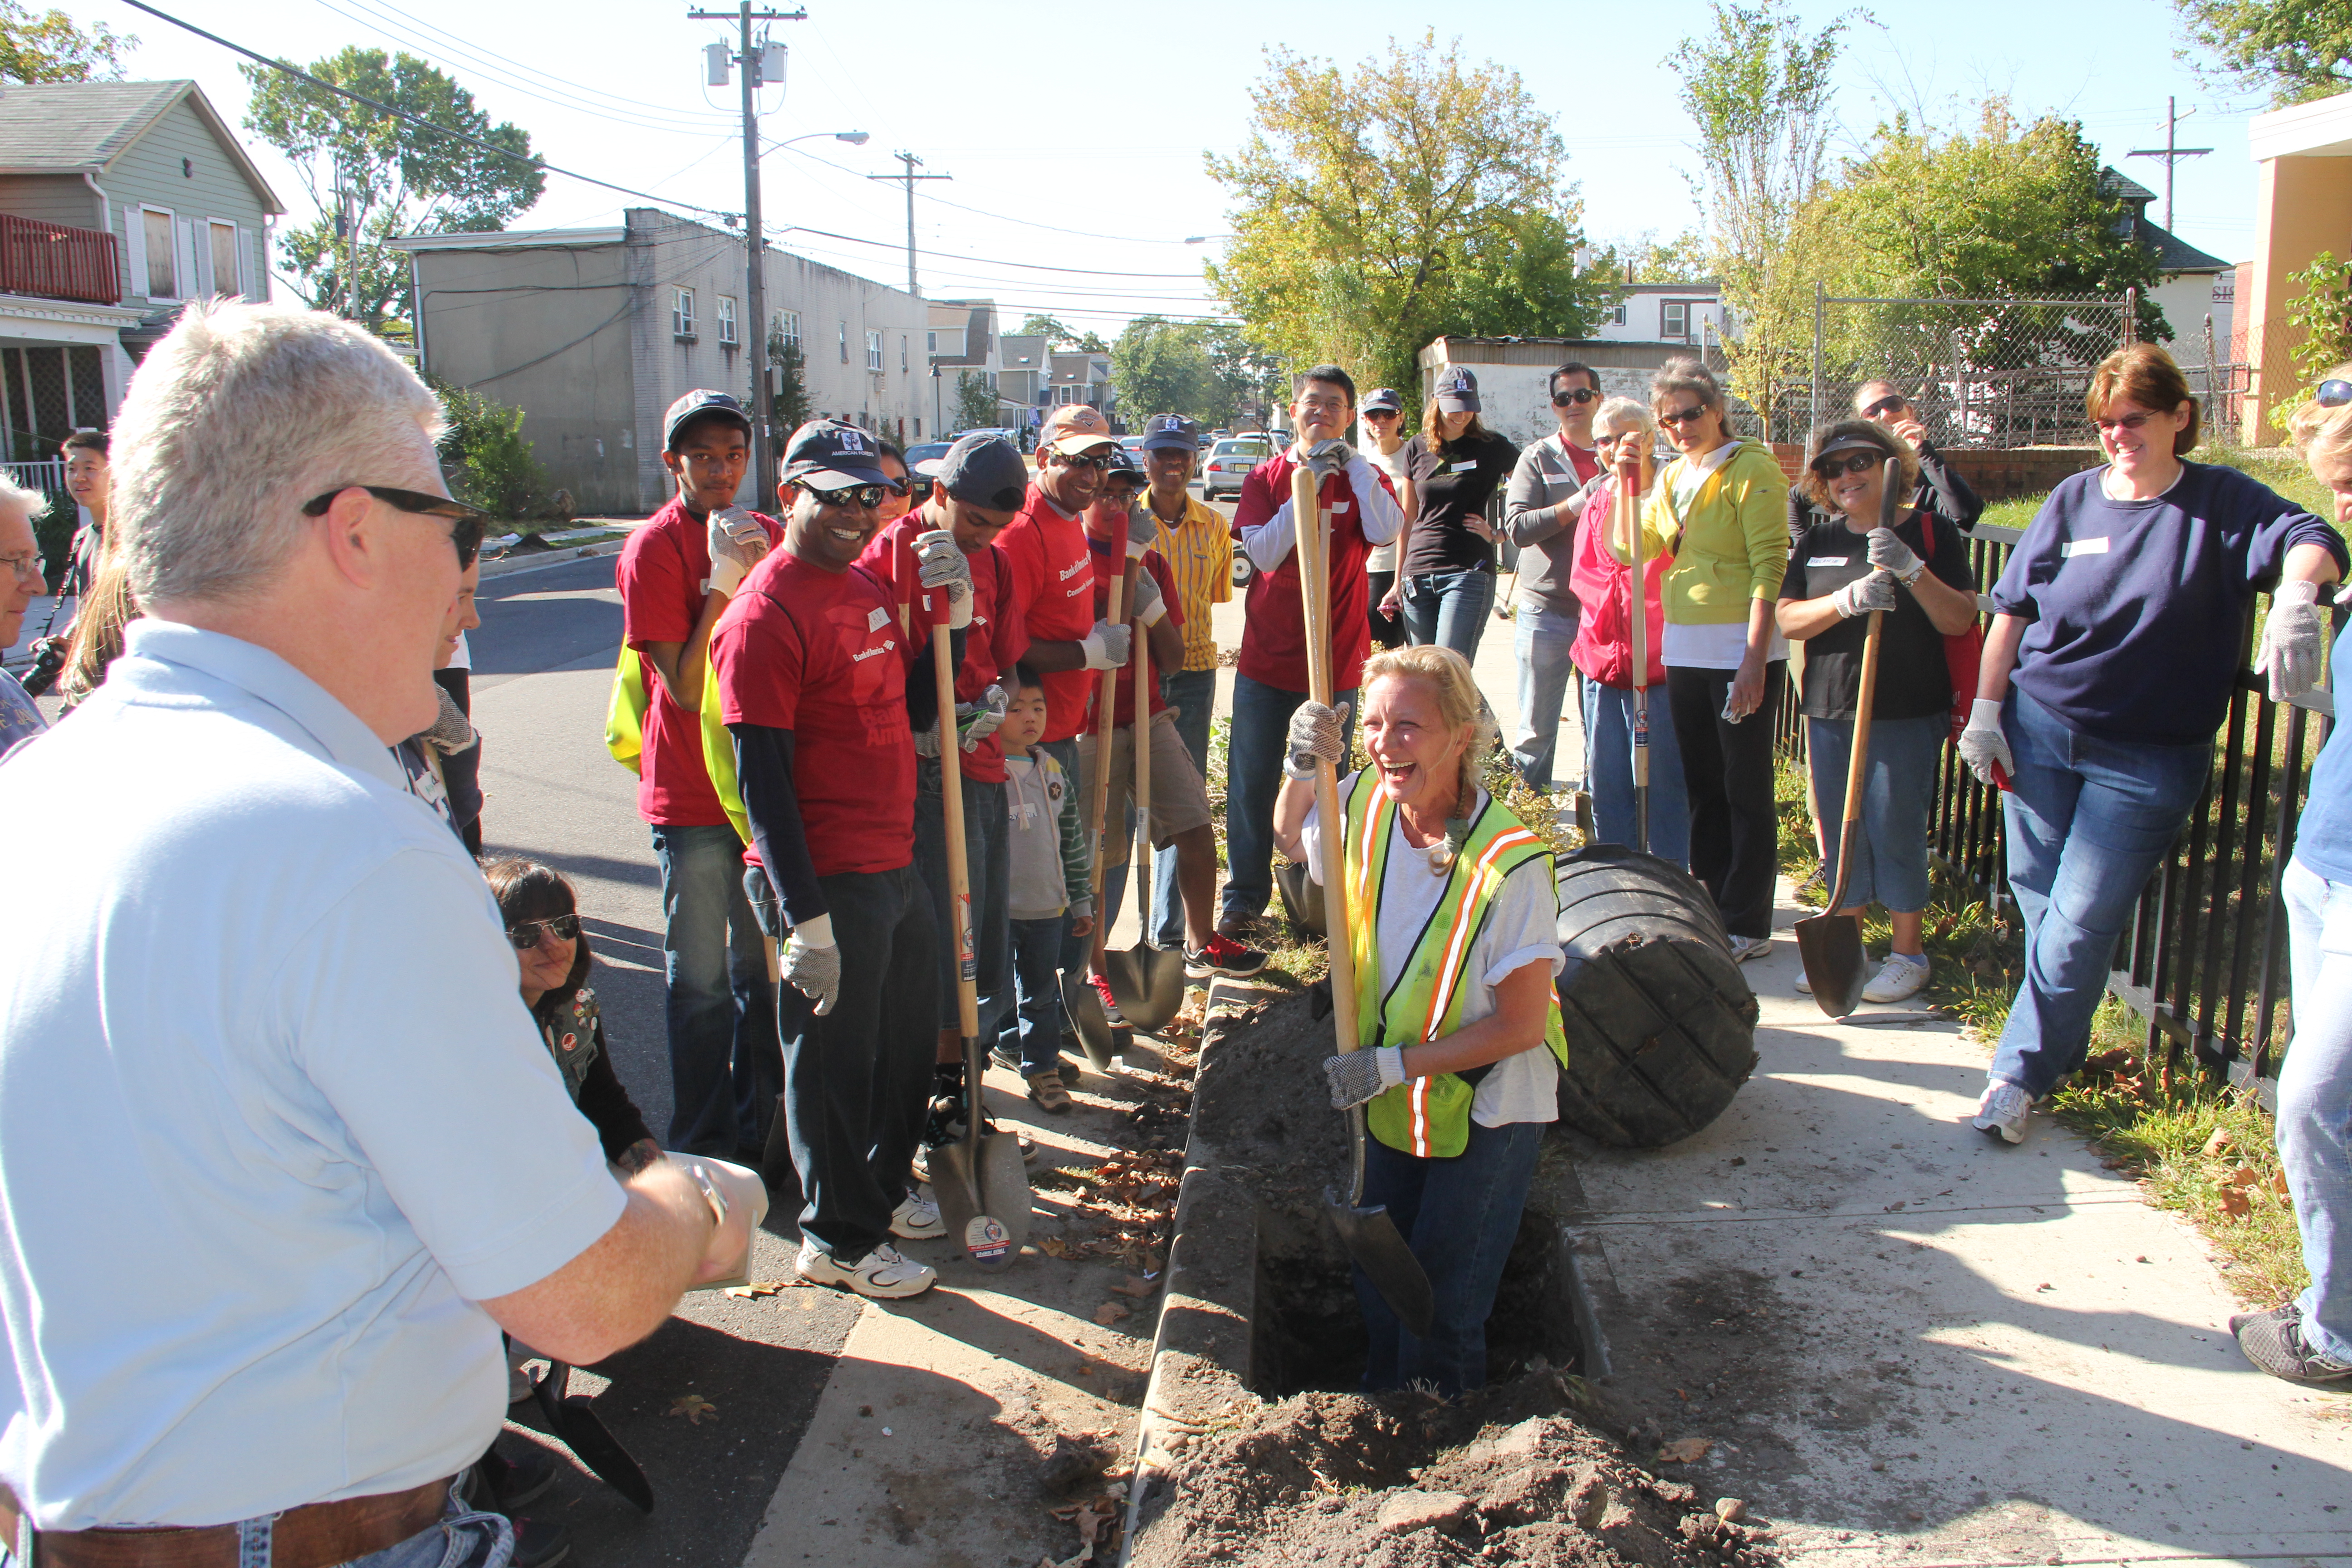 The first Community ReLeaf planting event took place is Asbury Park, N.J. with sponsor Bank of America Foundation